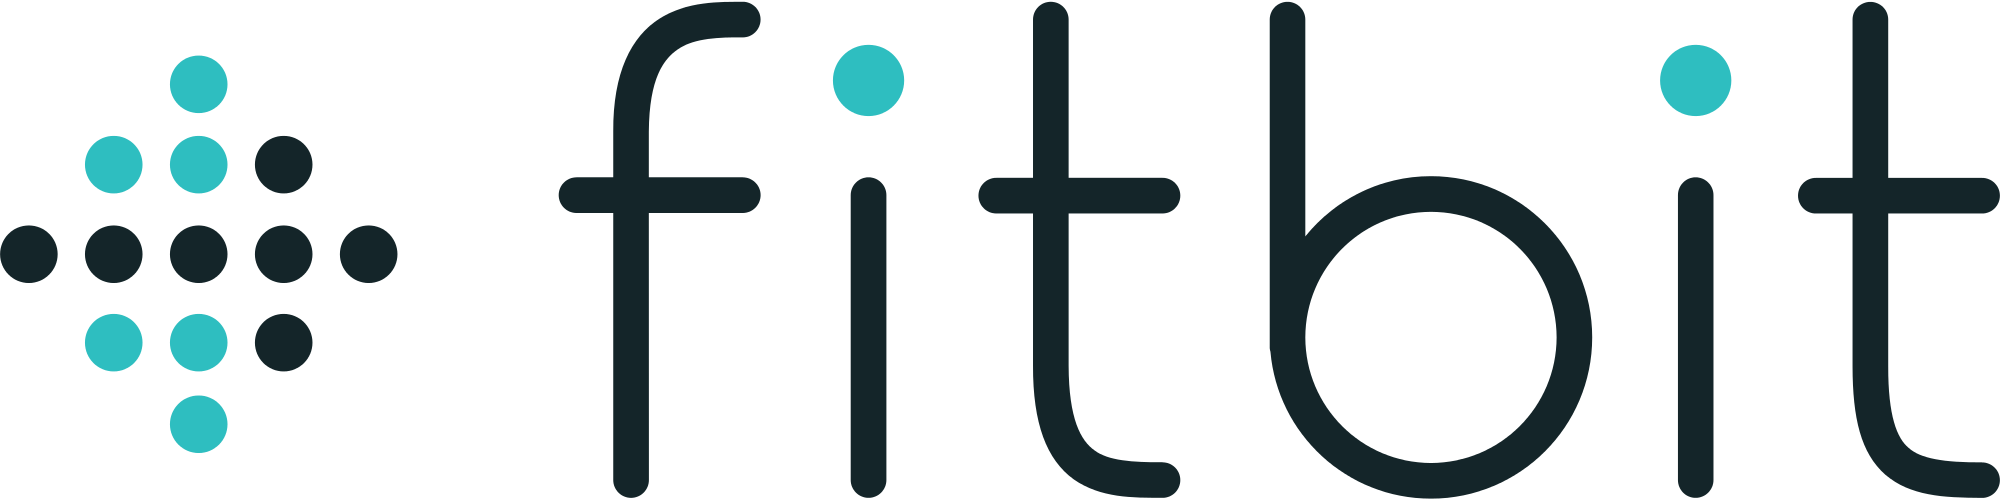 2000px-Fitbit_logo.svg.png